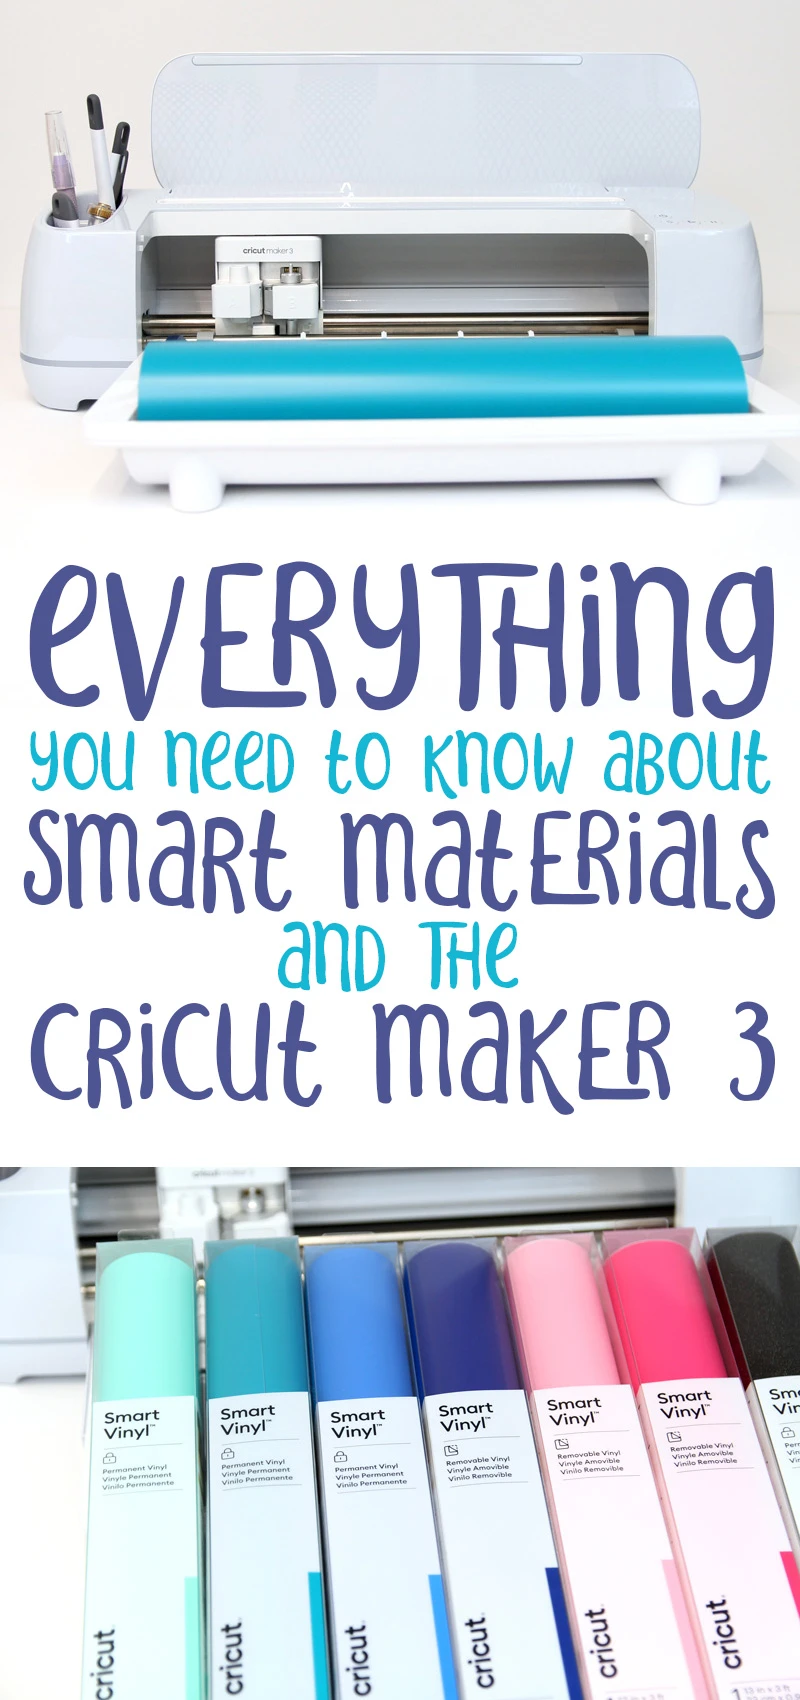 Cricut maker 3 review materials collage